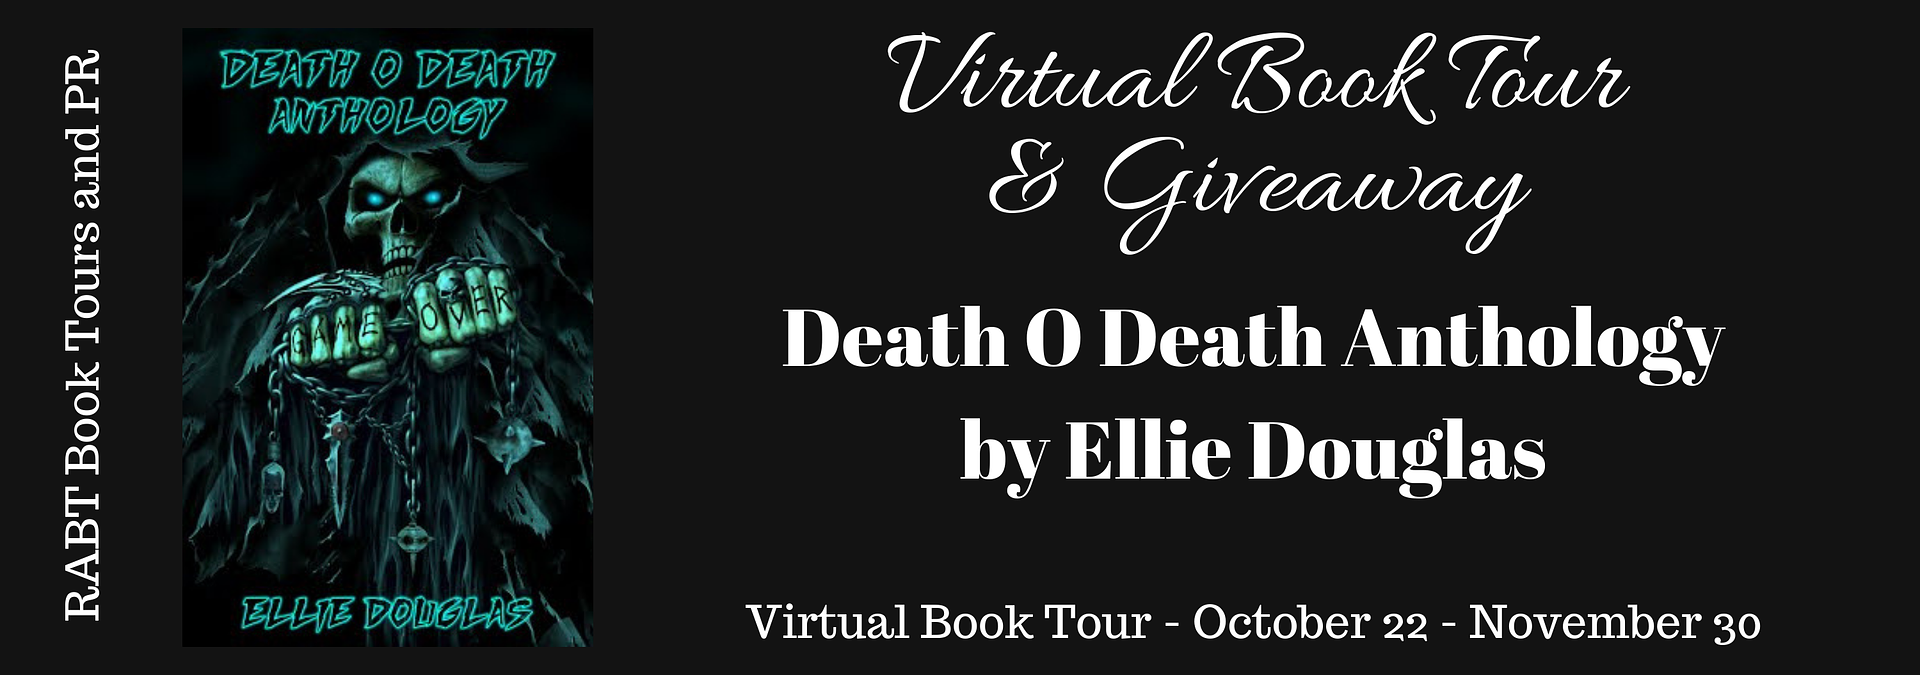 Virtual Book Tour: Death O Death by @AuthorEllie #interview #giveaway #horror